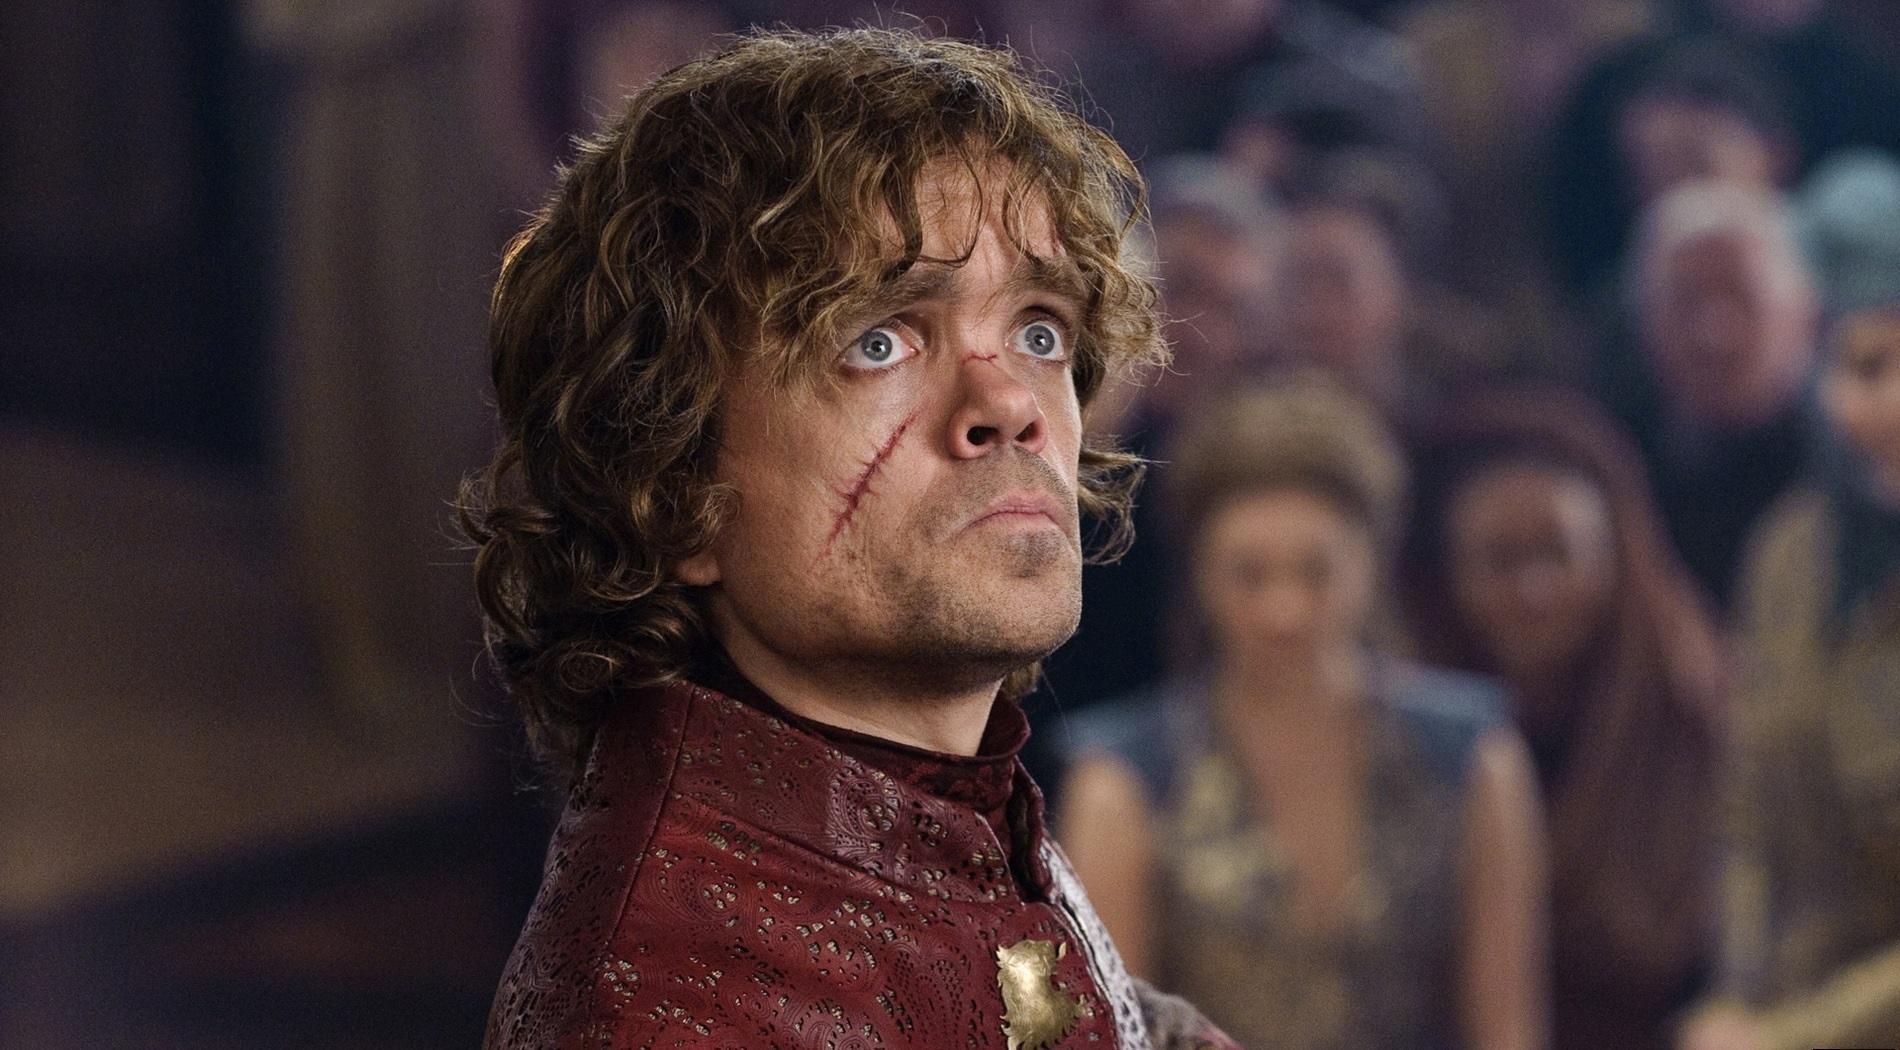 Every 'Game of Thrones' Season Recapped and Explained